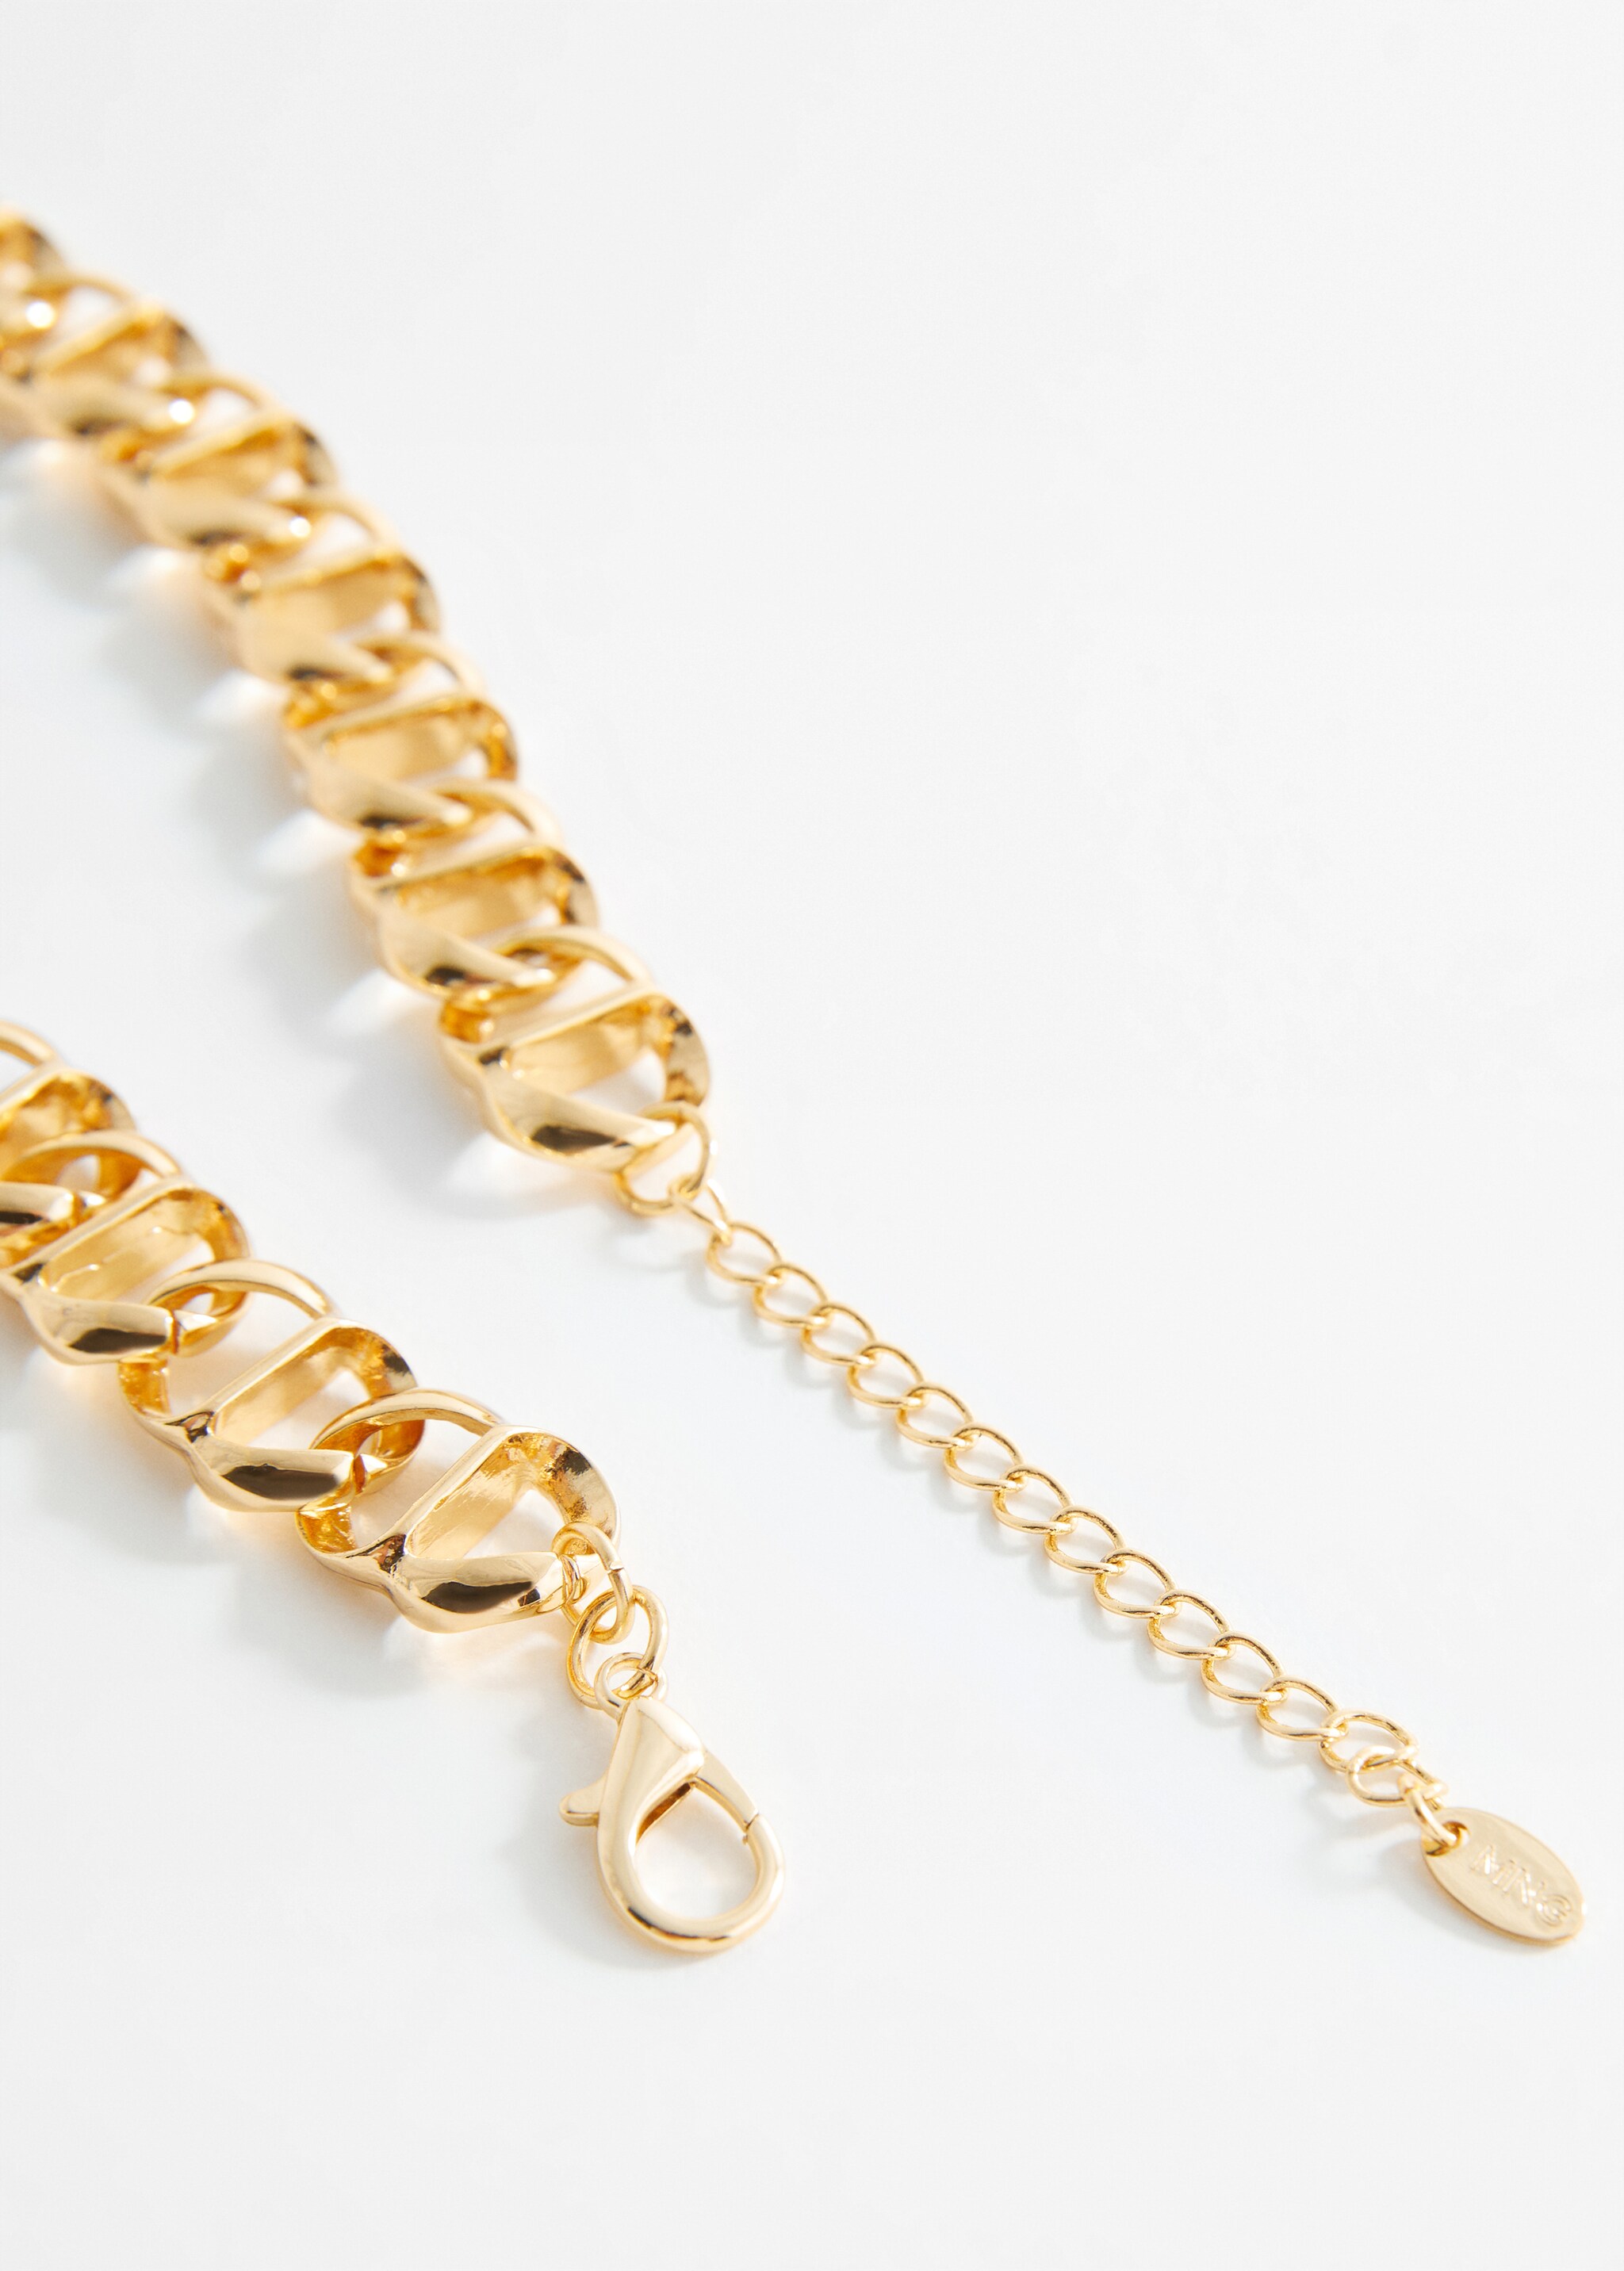 Link chain necklace - Details of the article 1